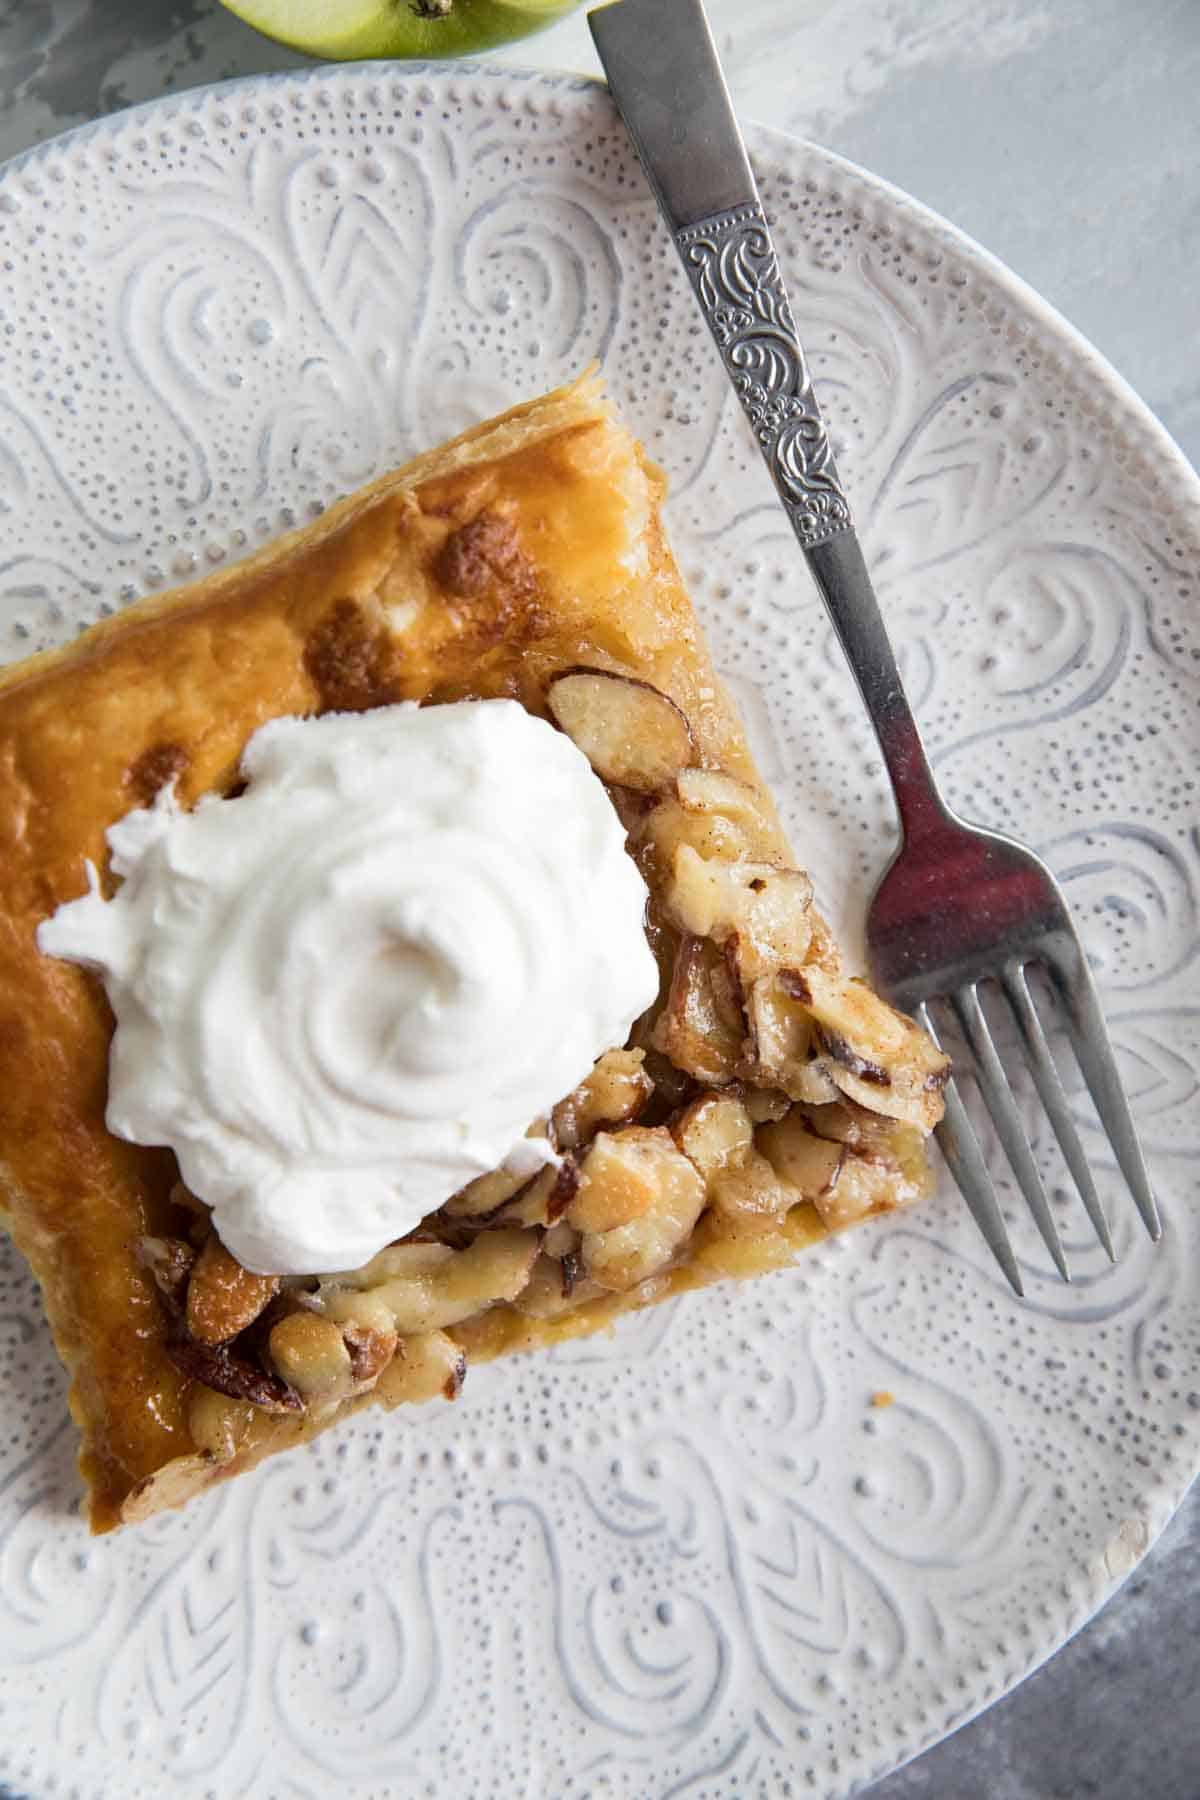 Apple Tart with Almond Topping